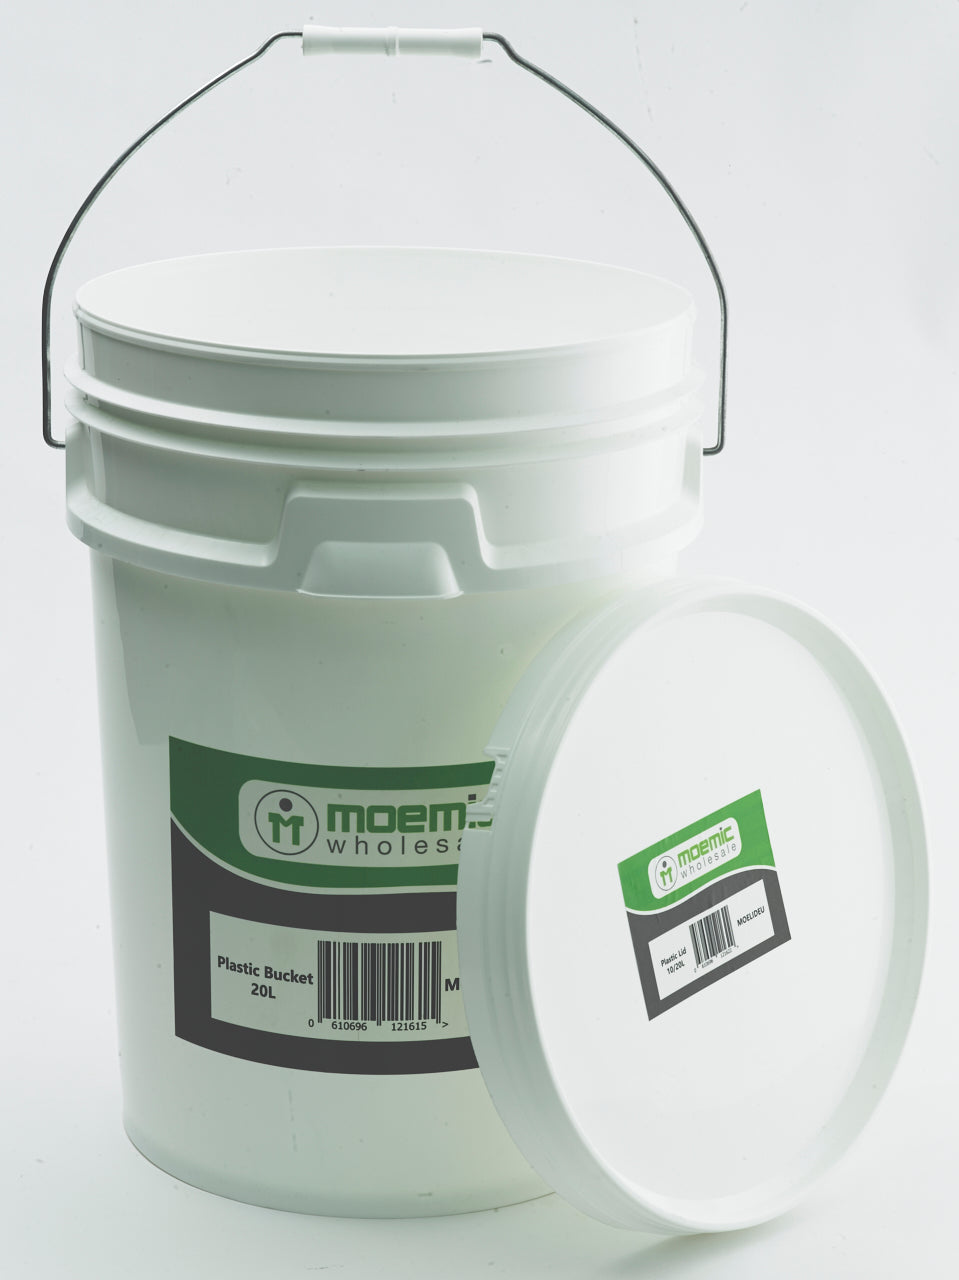 Moemic Plastic Pail Easylift - Tin Cans & Pails - Best Buy Trade Supplies Direct to Trade